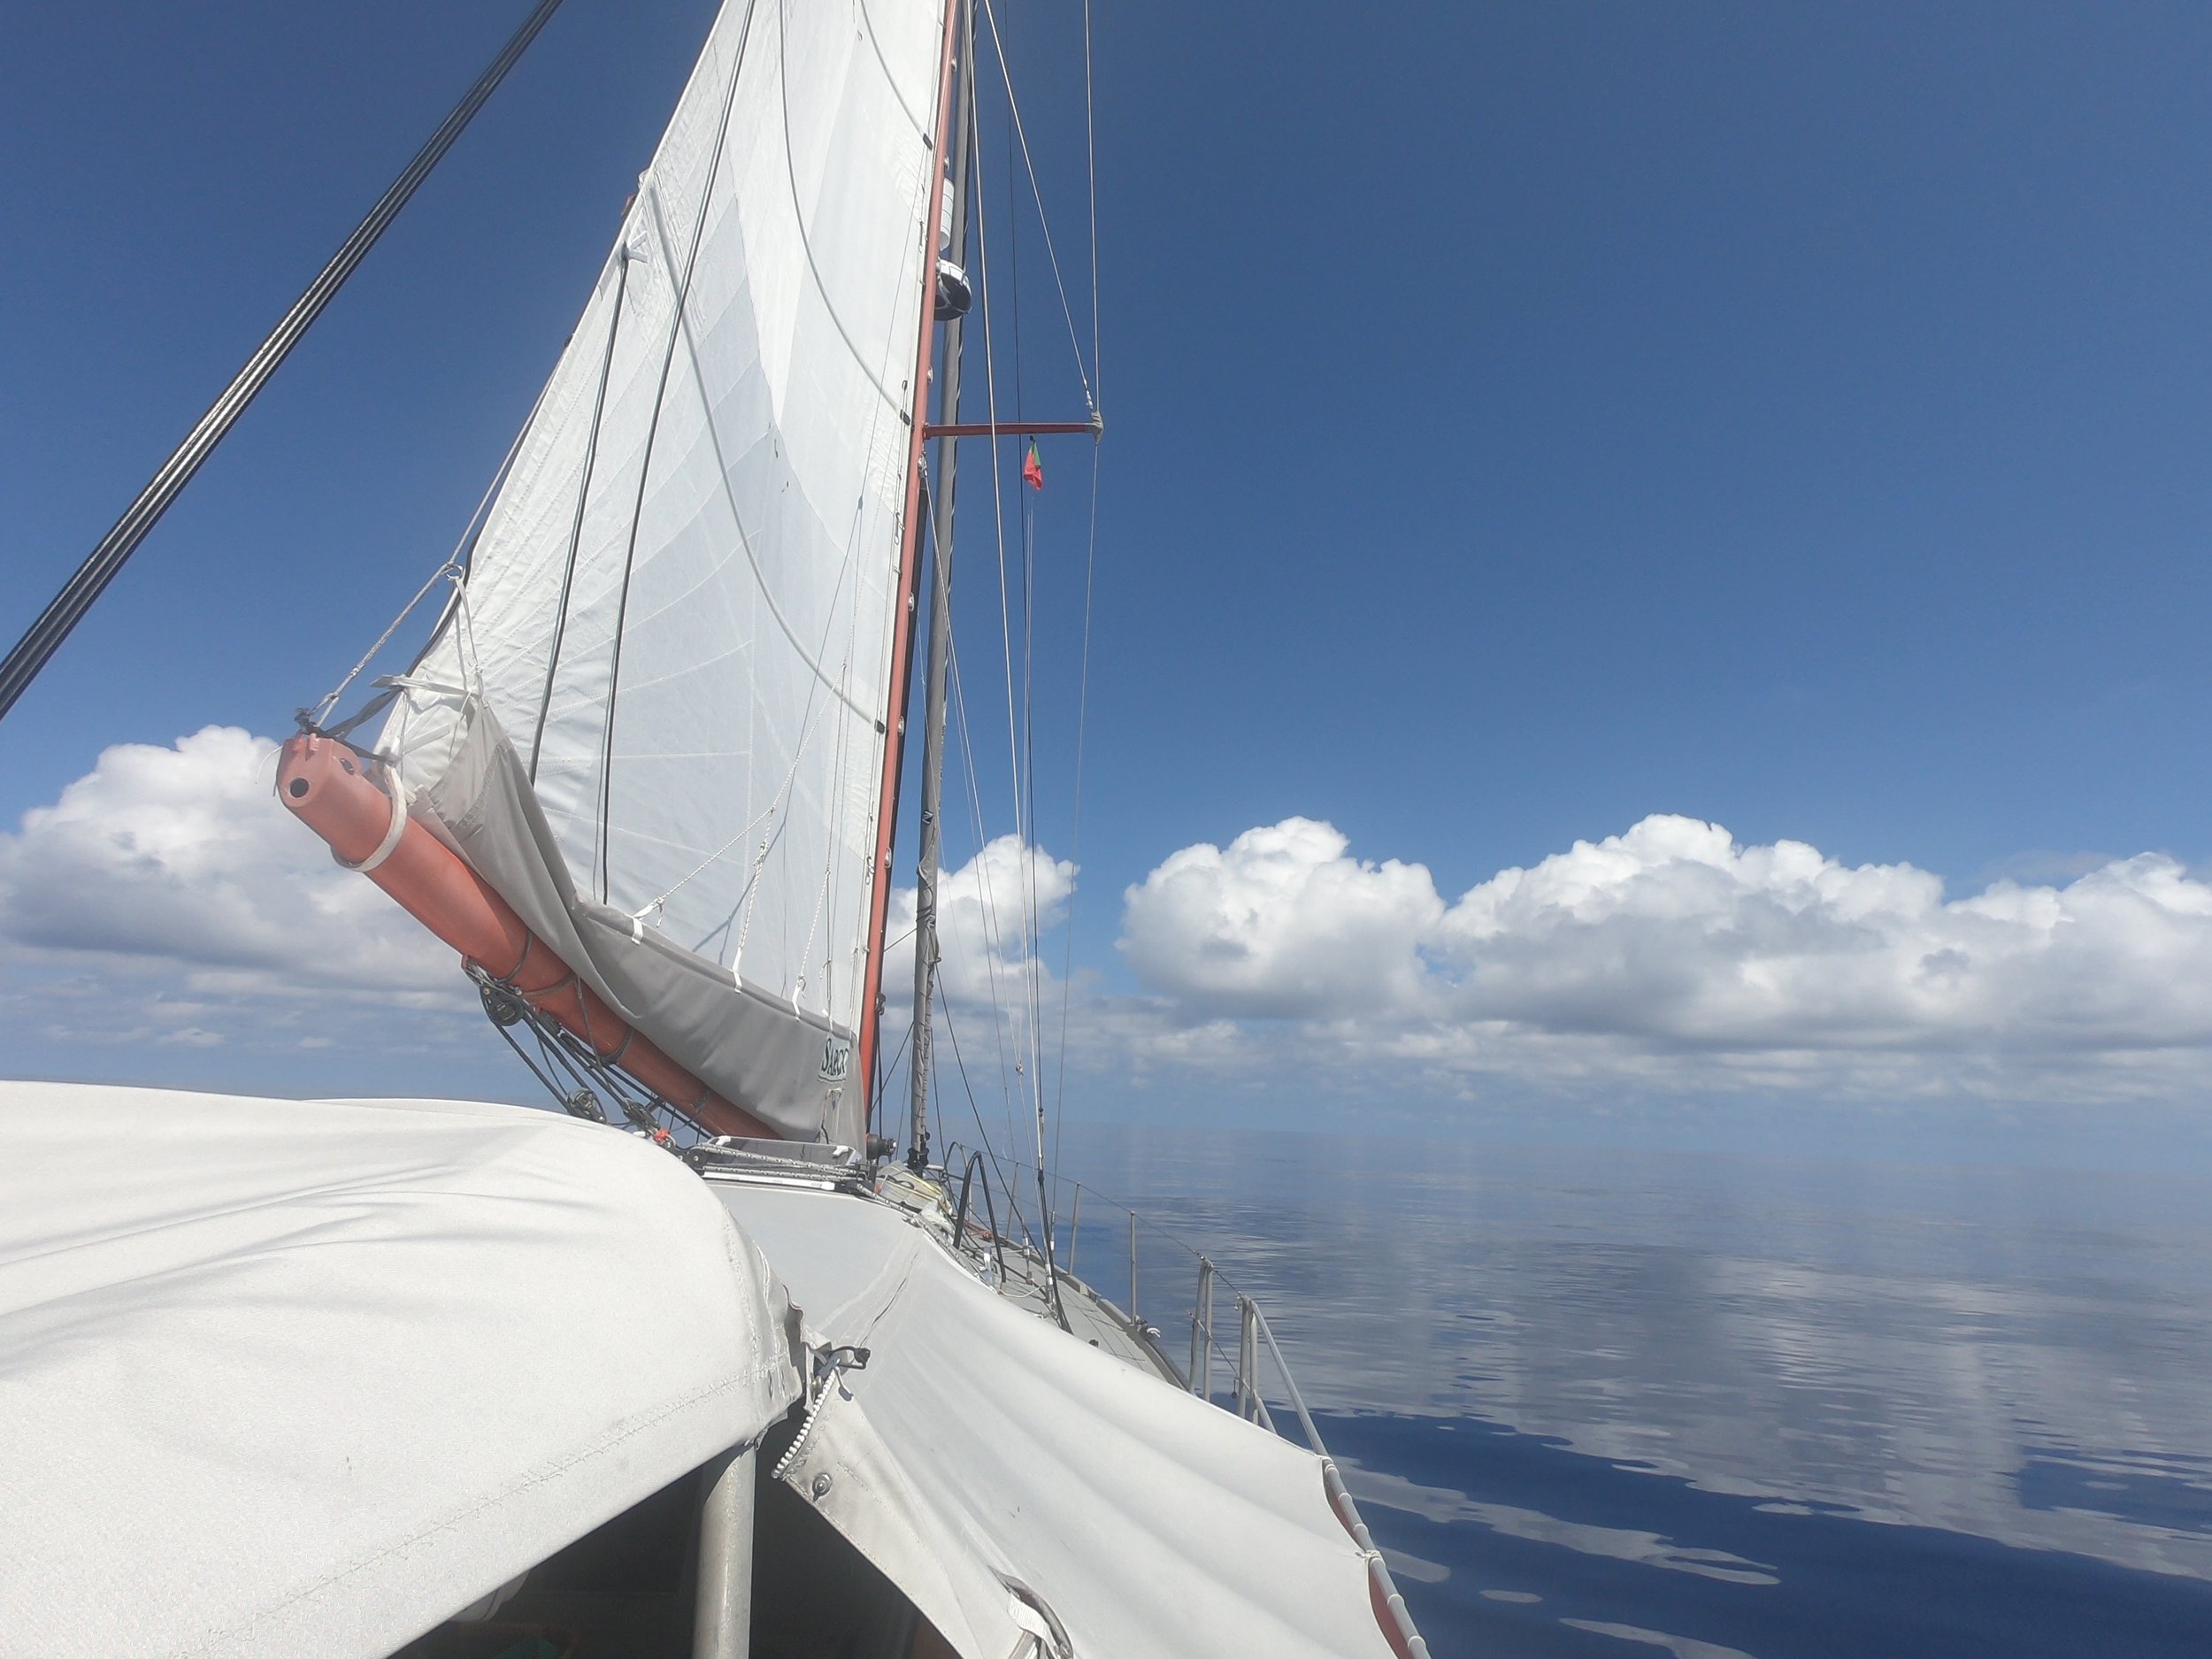 Motoring out of the Azores high